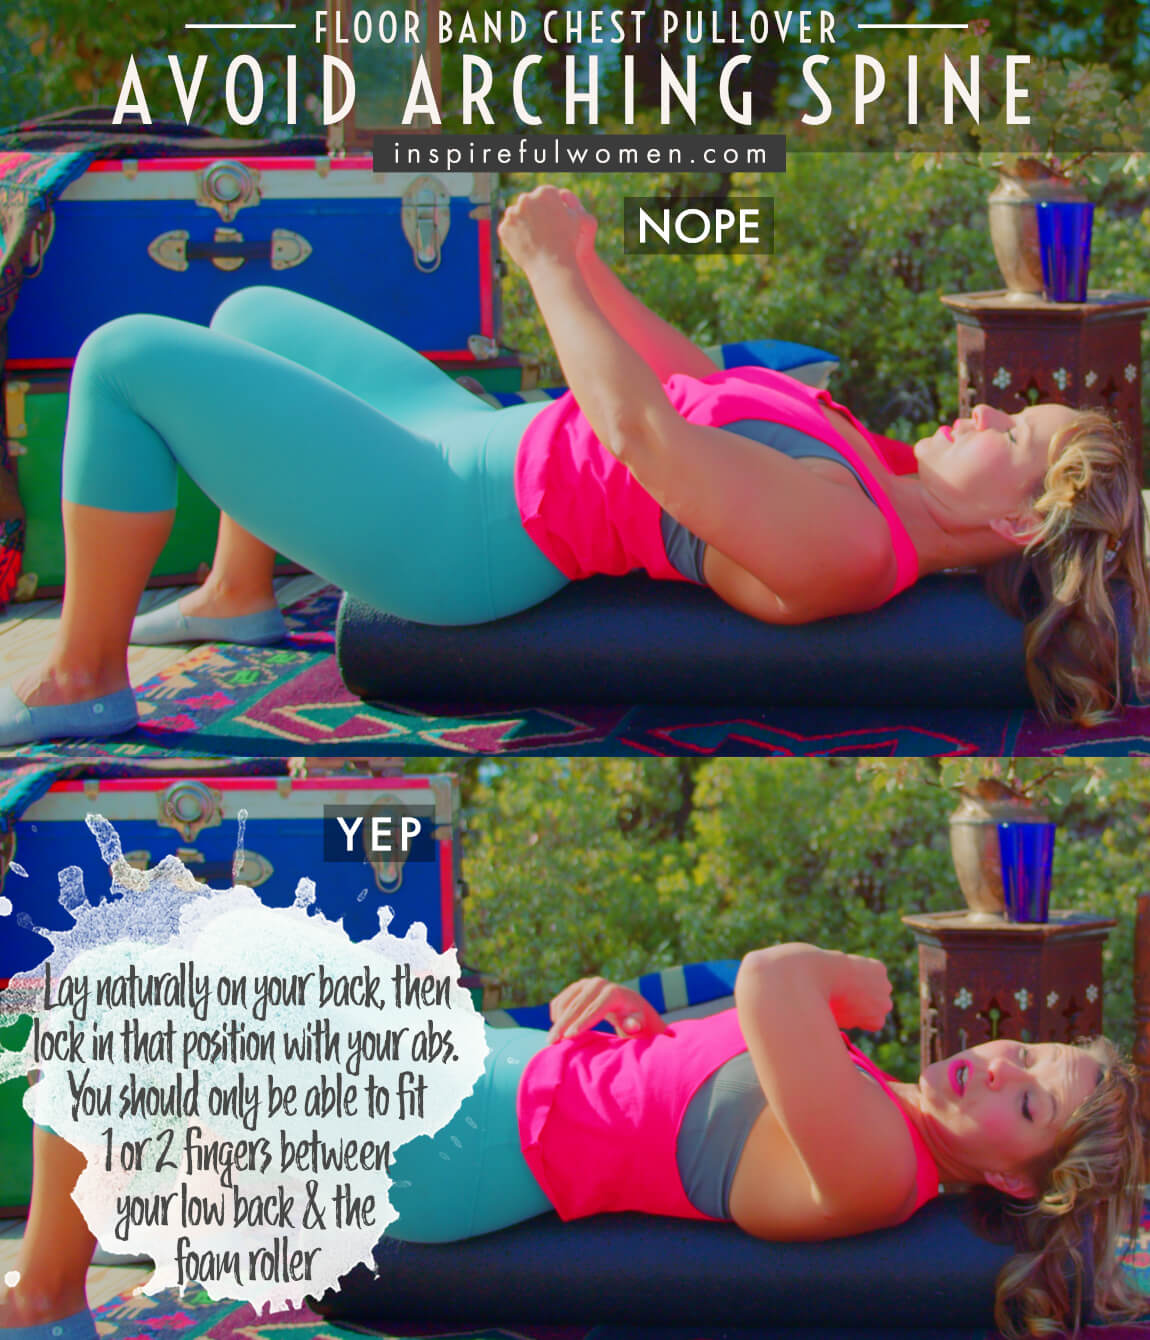 avoid-arching-spine-floor-resistance-band-chest-pullover-common-mistakes